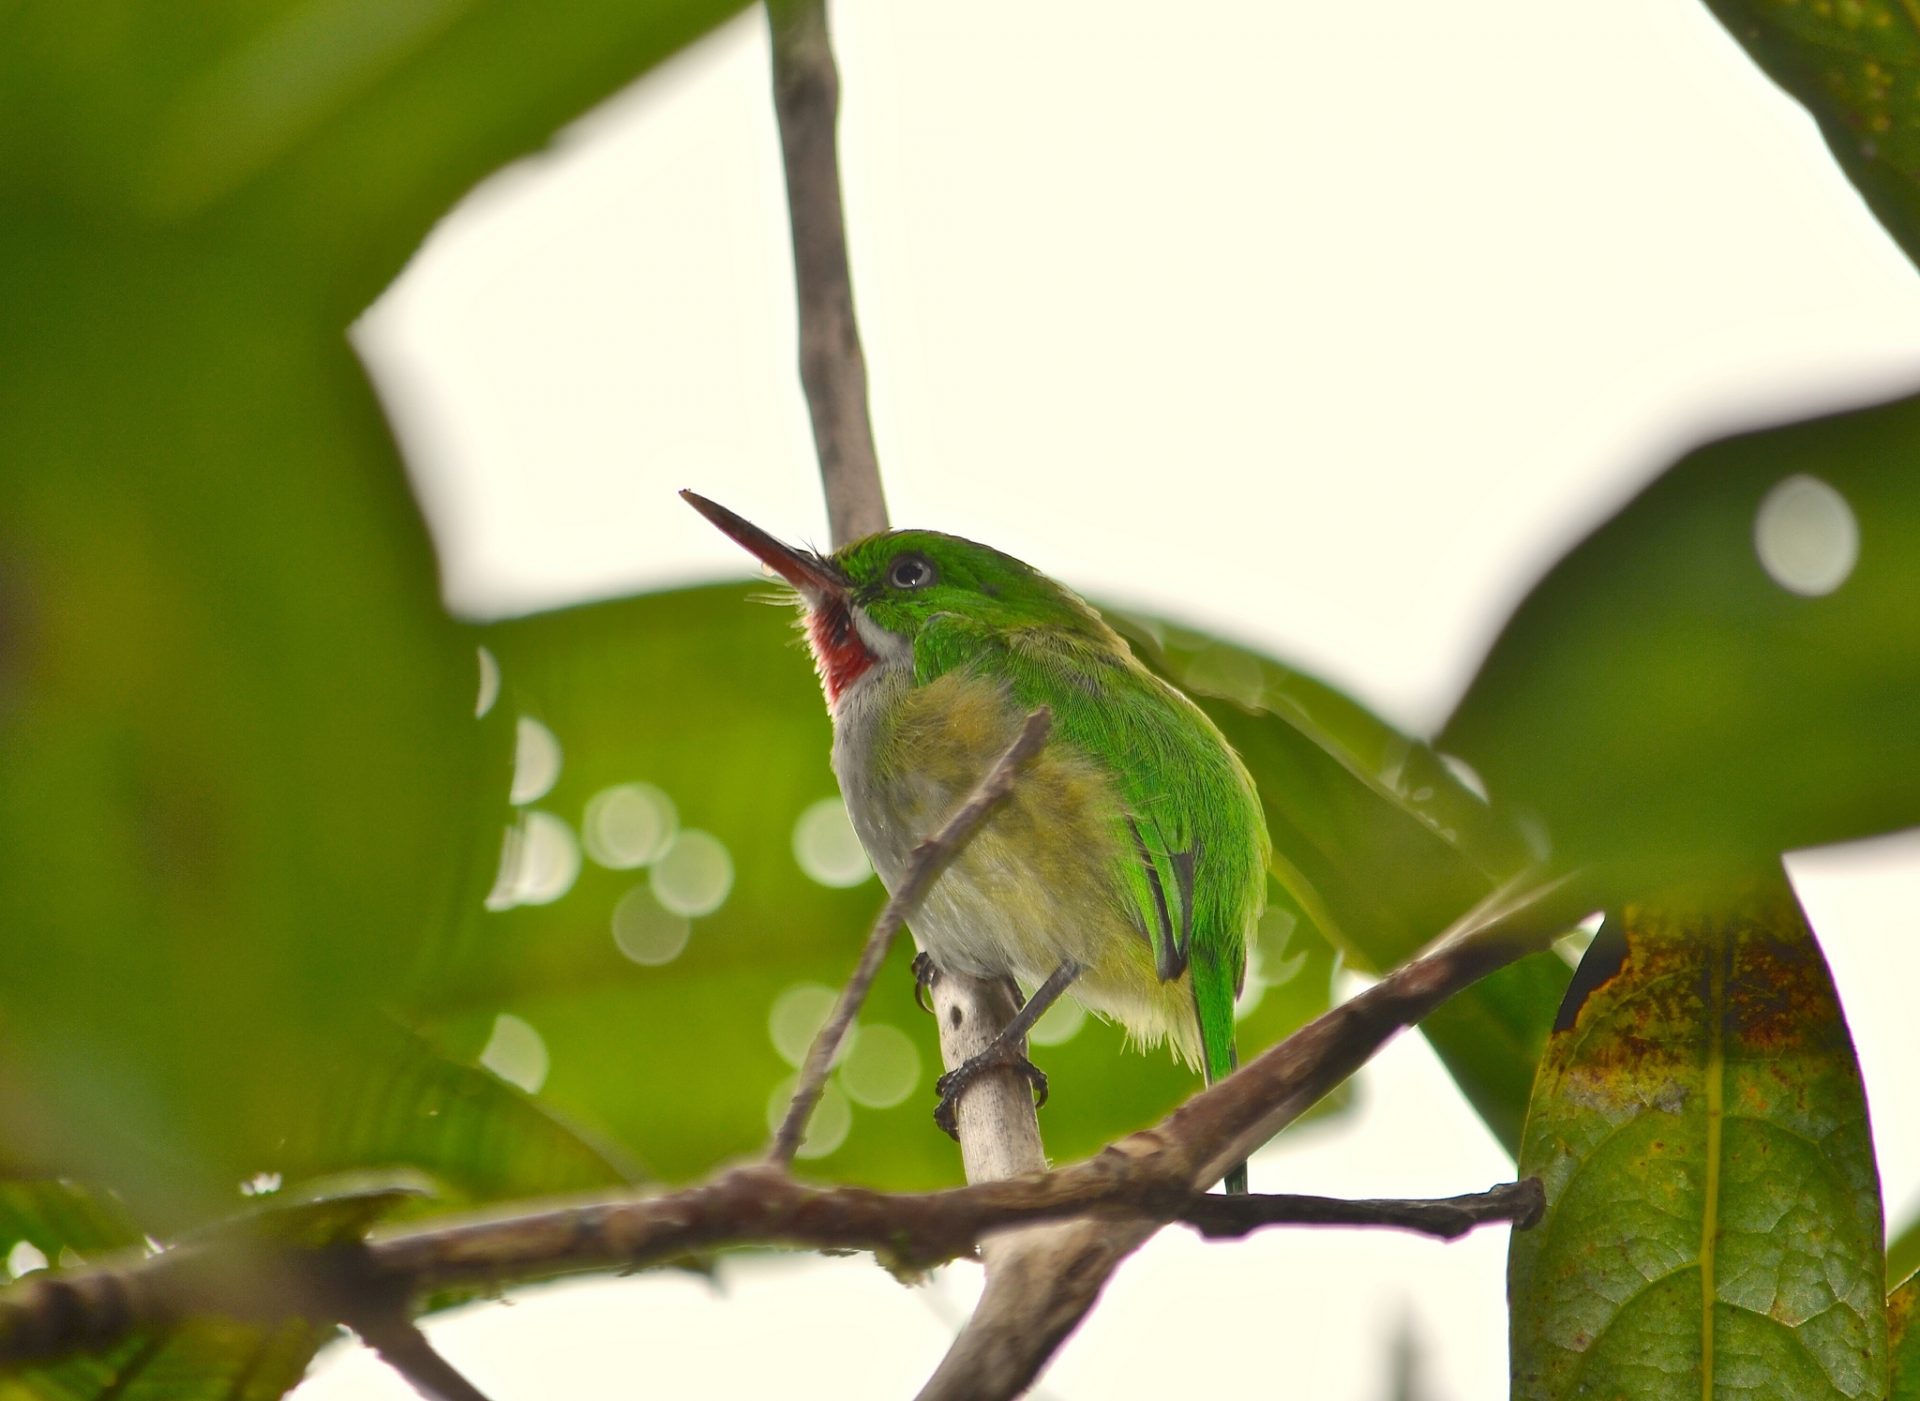 A tody, a type of bird related to kingfishers, in Puerto Rico.